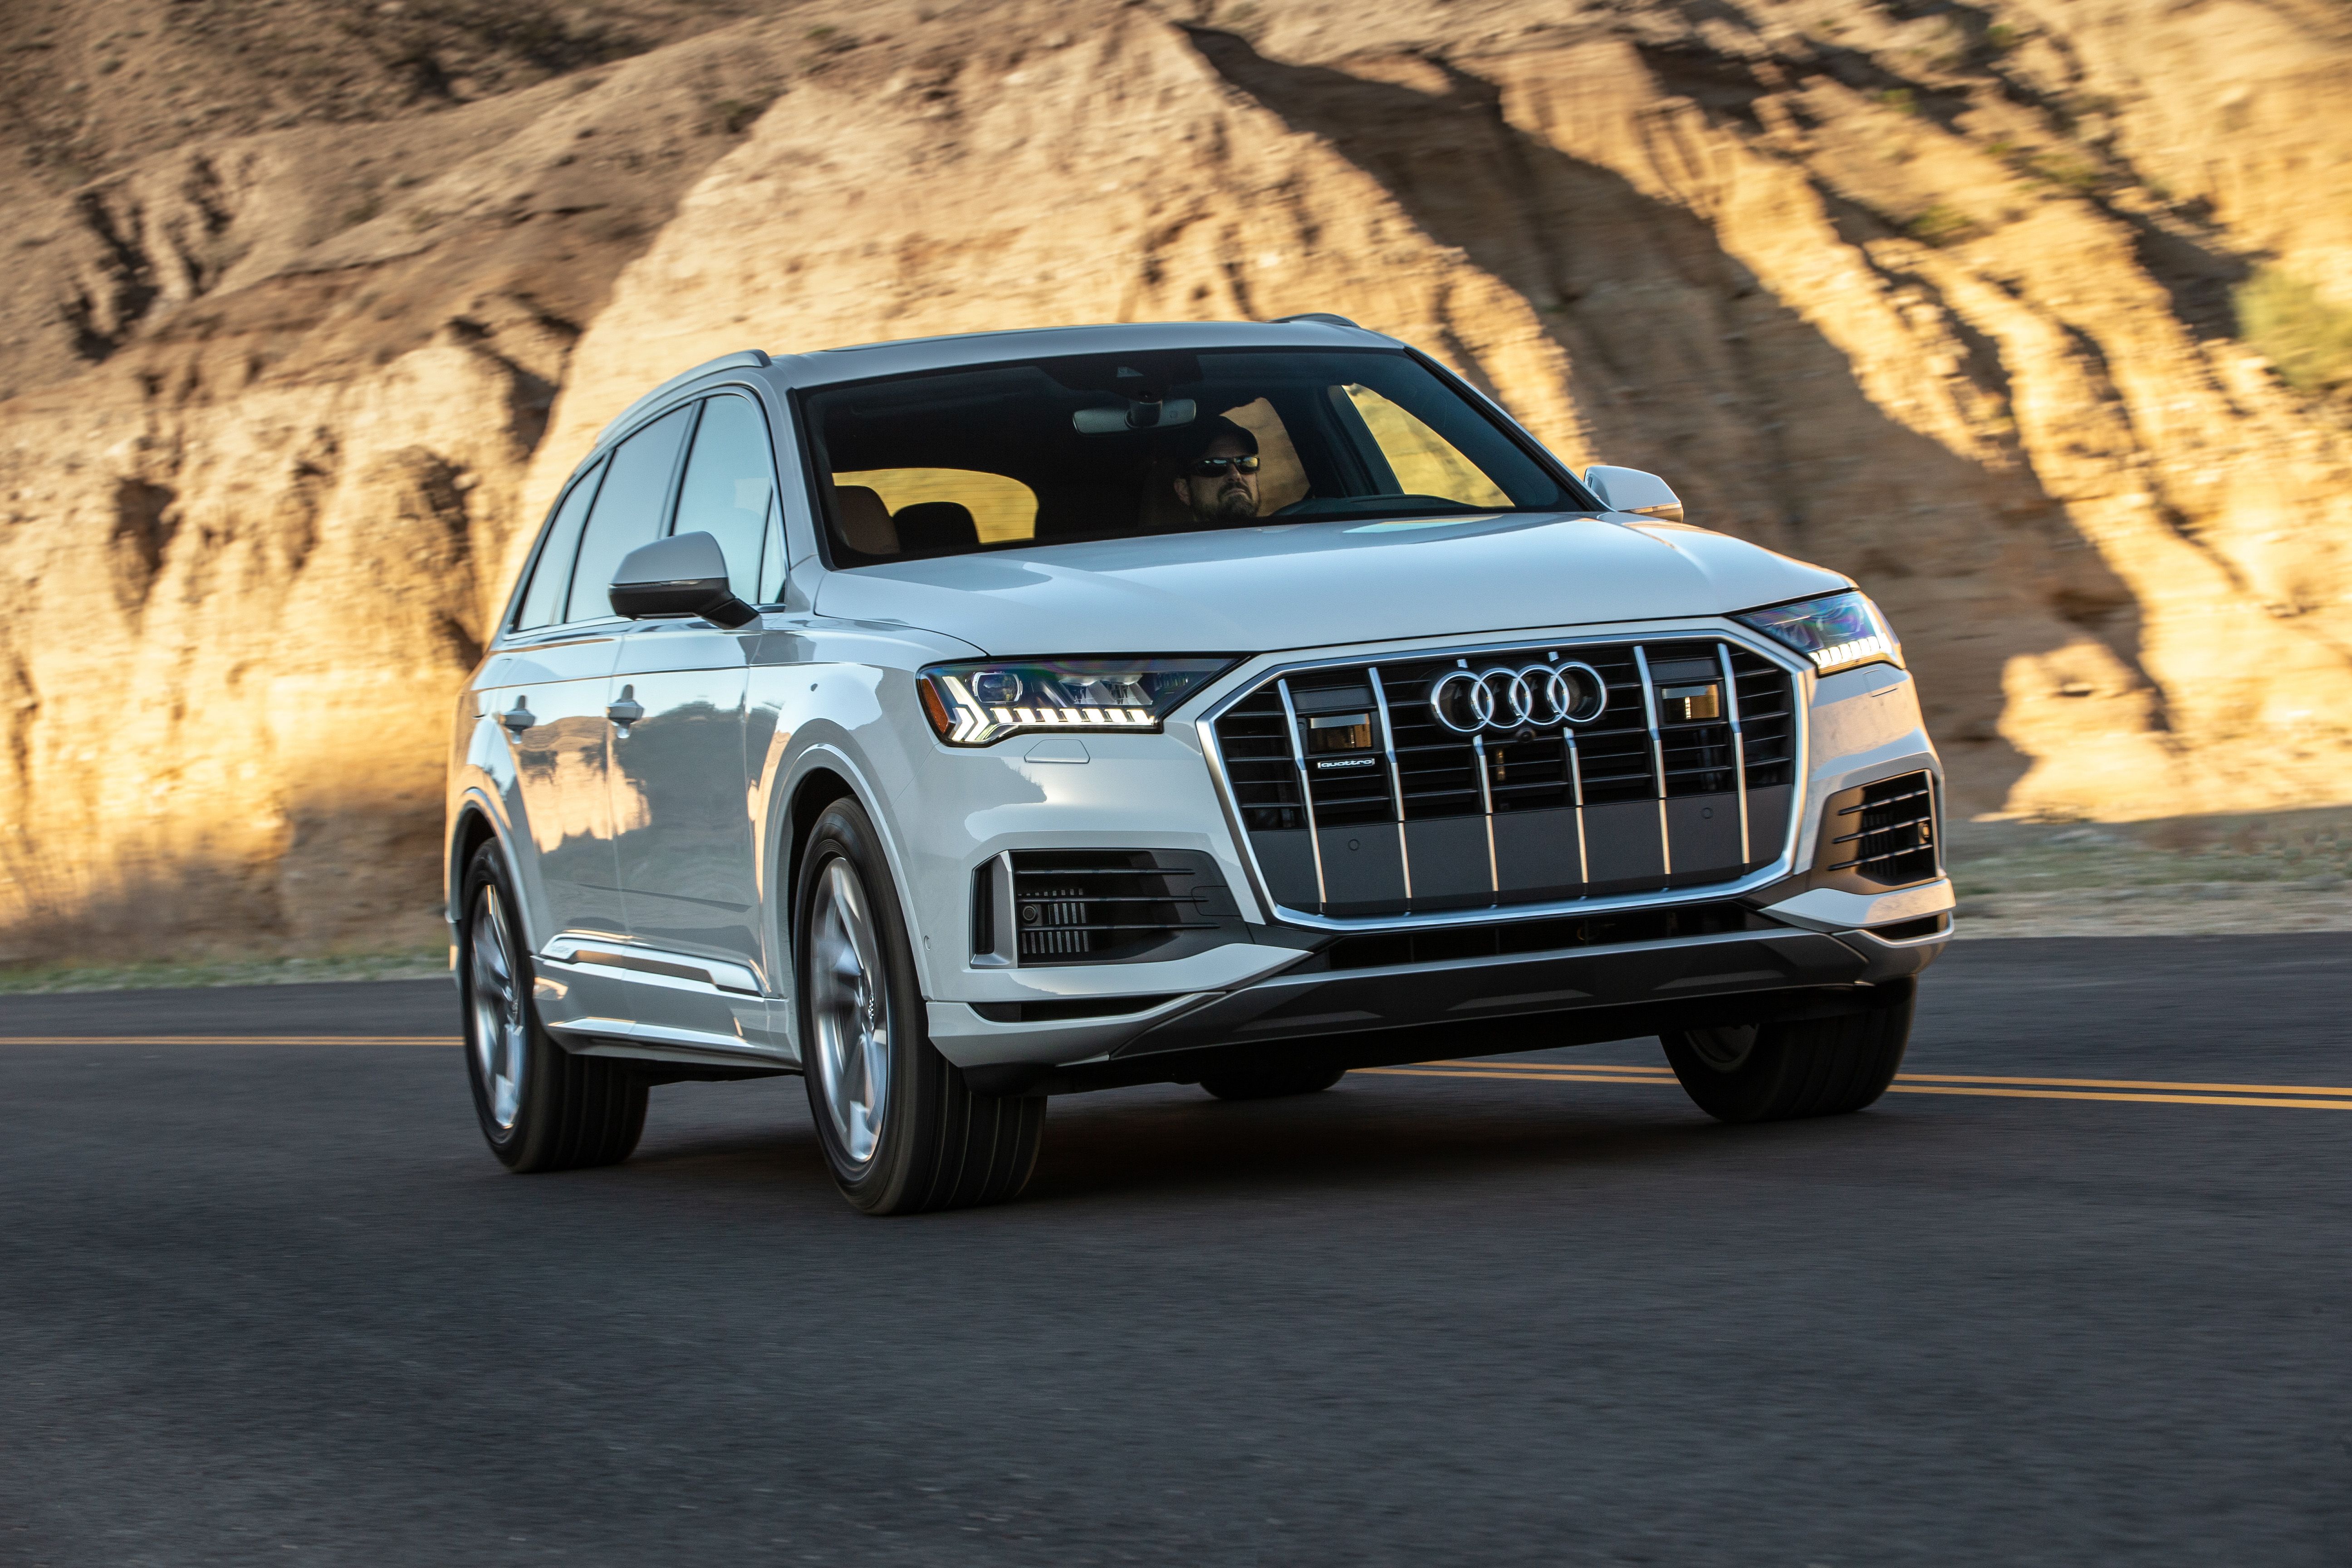 vluchtelingen Marco Polo Maand 2022 Audi Q7 Review, Pricing, and Specs